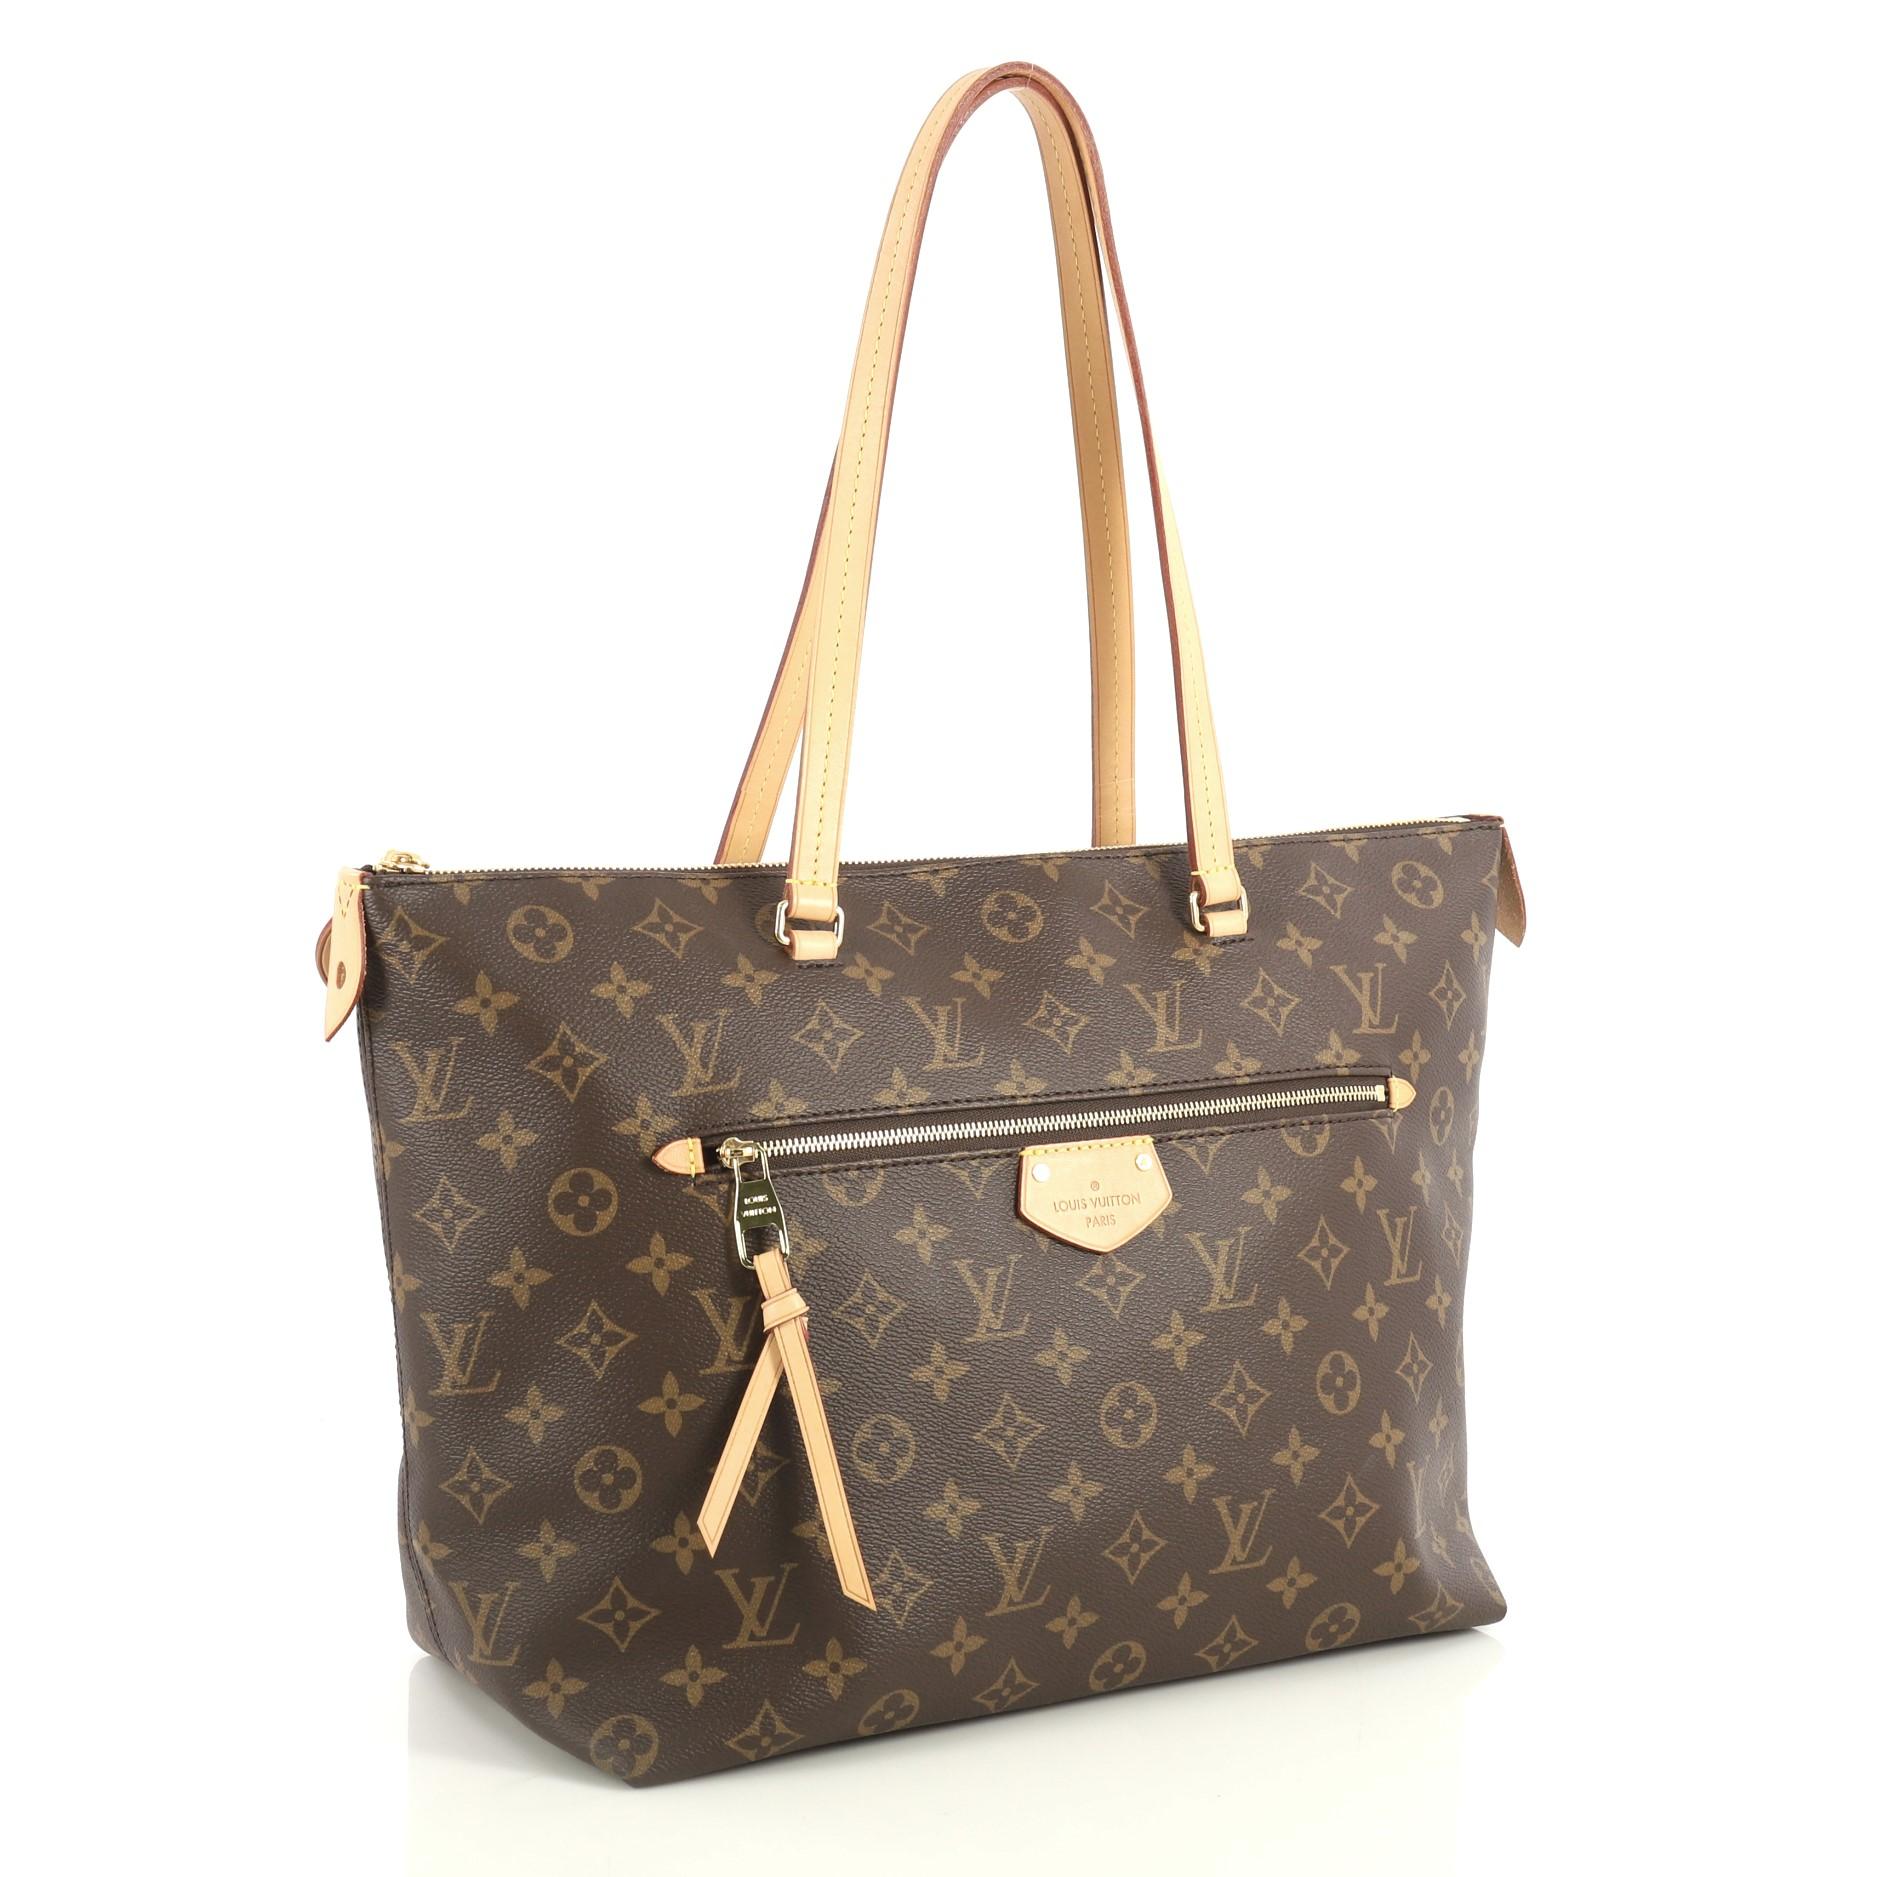 This Louis Vuitton Iena Tote Monogram Canvas MM, crafted from brown monogram coated canvas, features dual flat leather handles, exterior zip pocket, and gold-tone hardware. Its zip closure opens to a purple fabric interior with slip pockets.